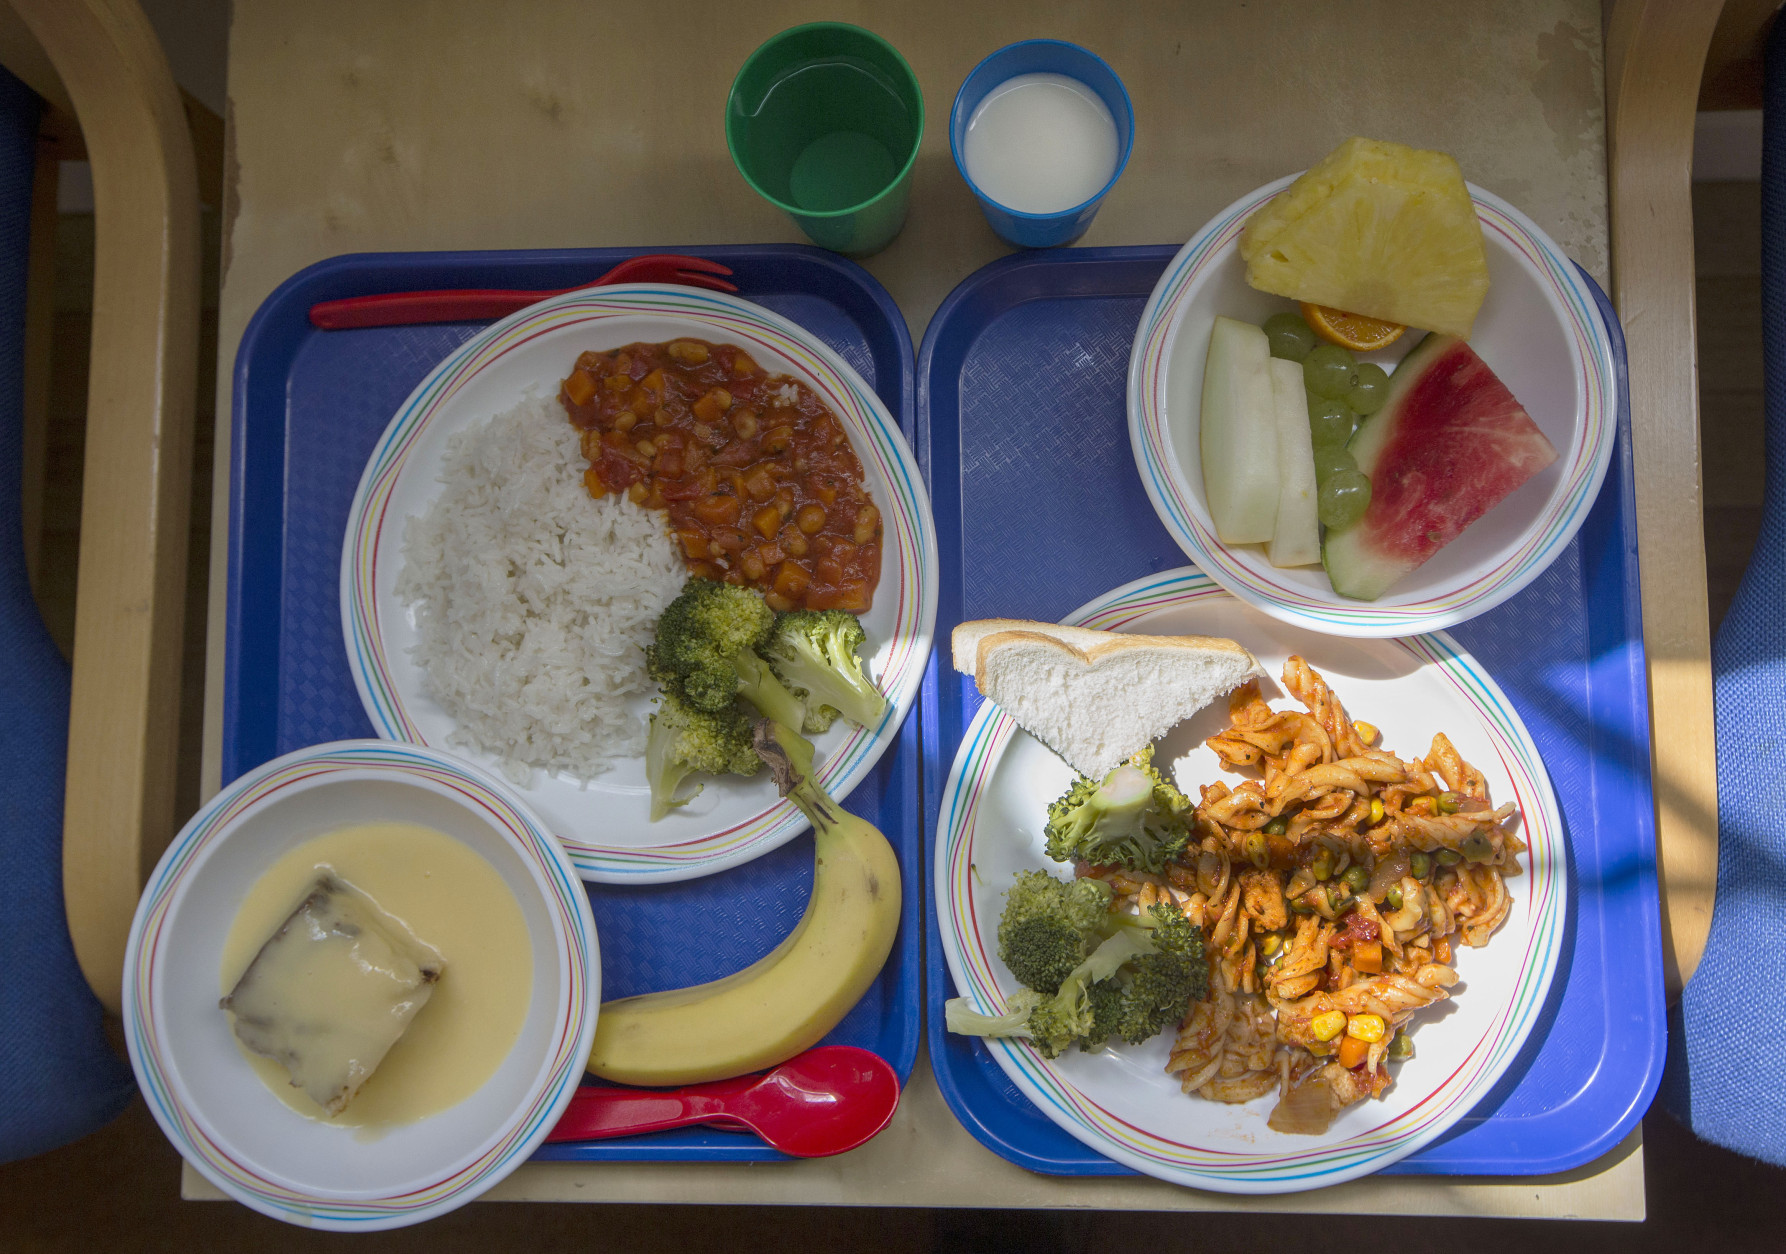 Two lunch trays at a primary school in London are served during a lunch break on Tuesday, May 6, 2014. The meal choice at right consists of pasta with fresh broccoli and slices of bread, and seasonal fresh fruit. At left are vegetable chili with rice and fresh broccoli, sponge cake with custard, and a banana. The drink options are milk and water. (AP Photo/Sang Tan)